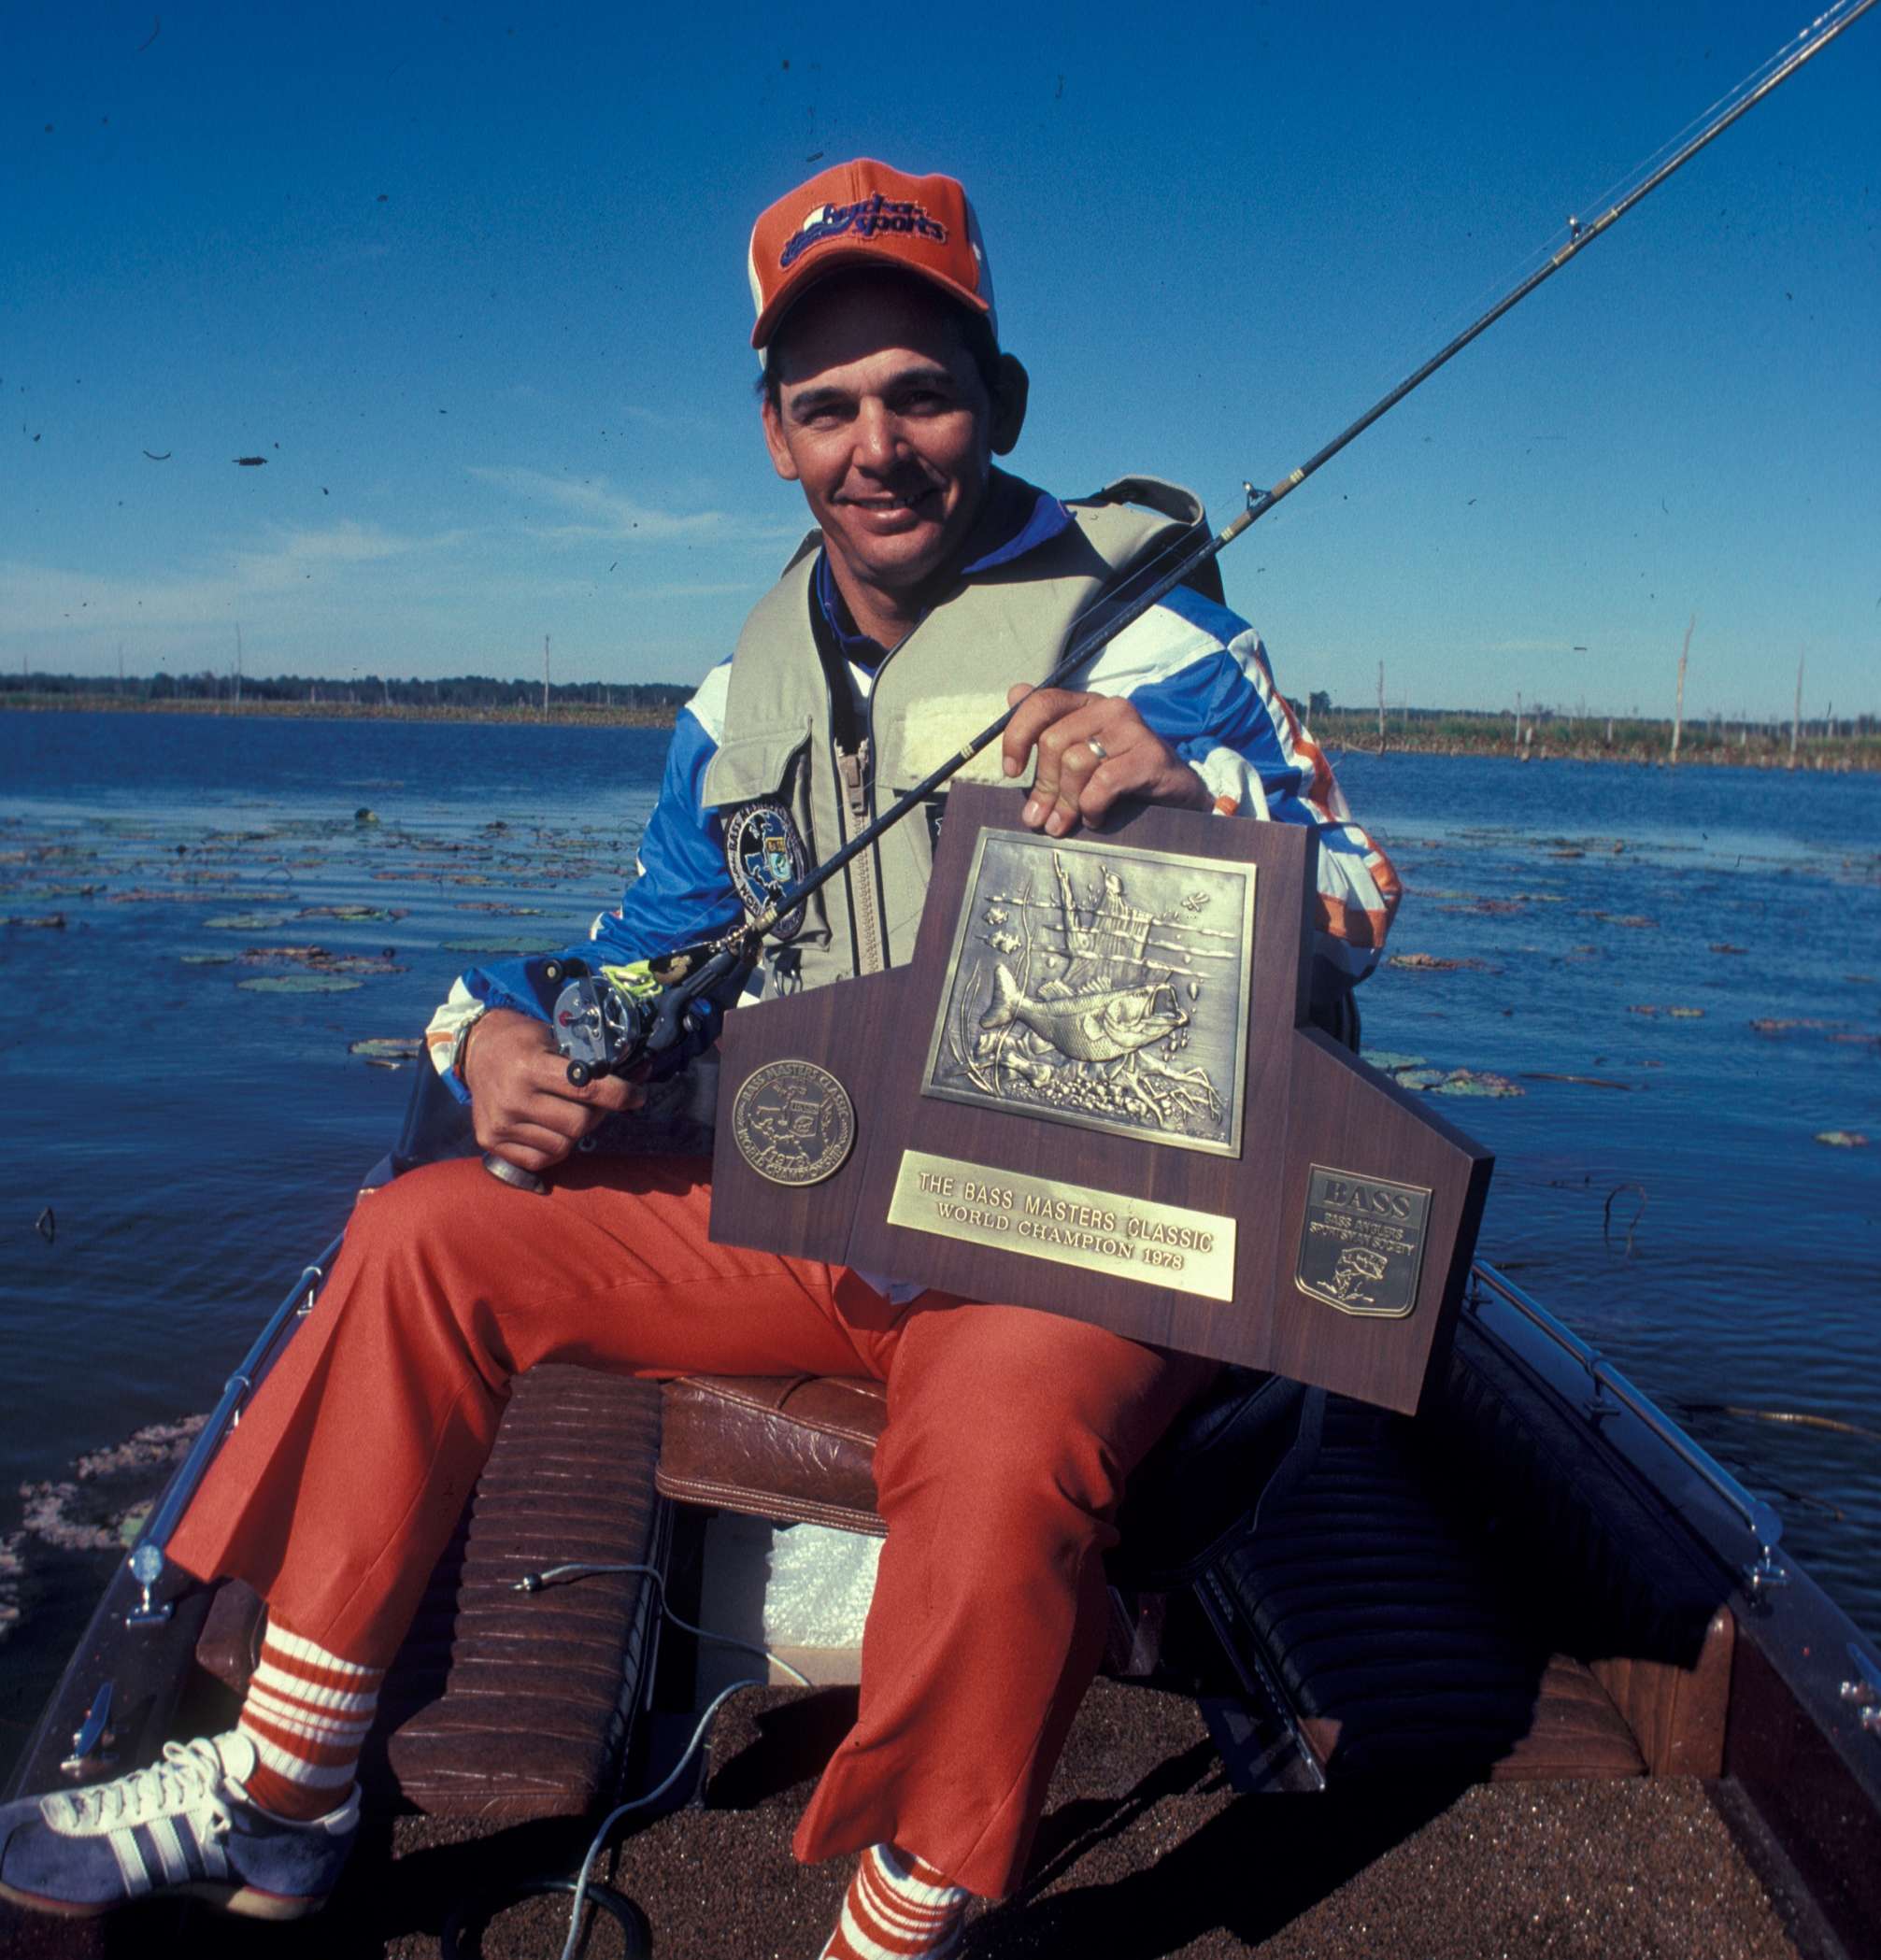 2. Who is your fishing hero?

Bobby Murray (pictured above). I grew up in Hot Springs, Ark. (Where Bobby Murray is from, as well.) I remember when he won that first Bassmaster Classic (in 1971) and when he won it again (in 1978). Bobby took me fishing when I was just learning how to bass fish. Being on the lake with Bobby was like a crash course, with the knowledge he had. He was a very versatile fisherman, and he was willing to share that with a kid. It was invaluable.